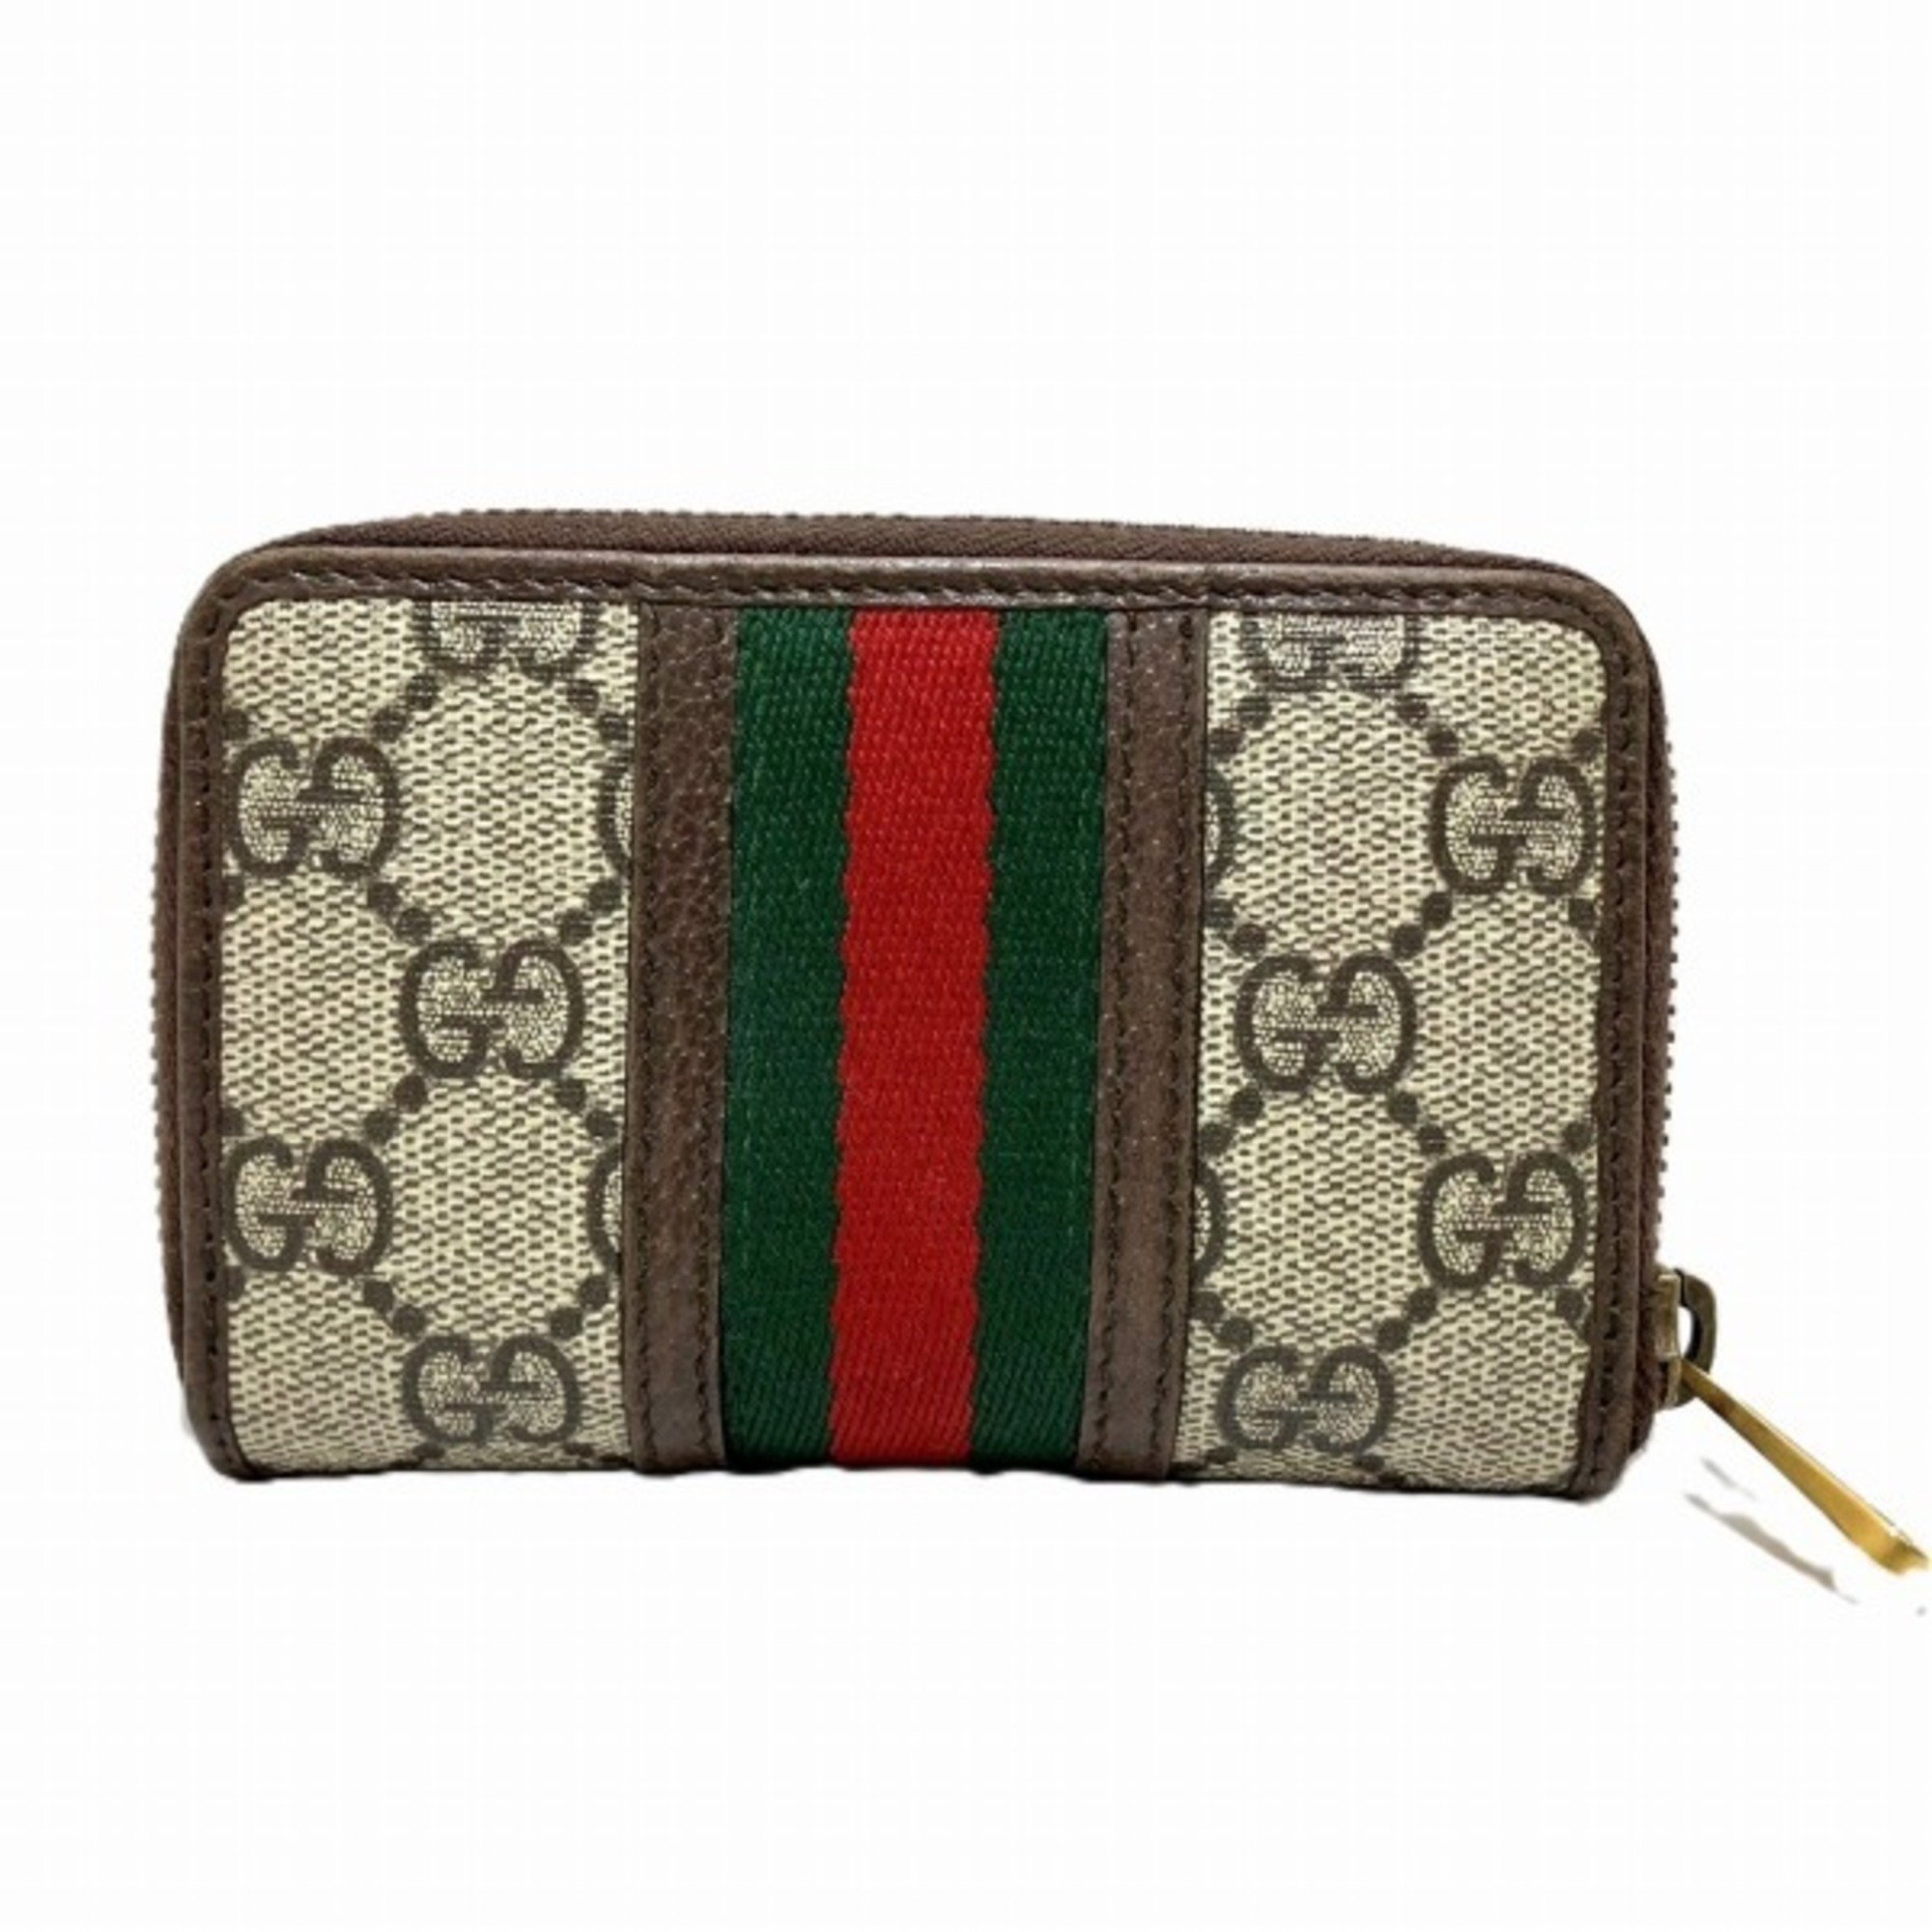 GUCCI GG Supreme Ophidia Coin Case 597613 Unisex Wallet